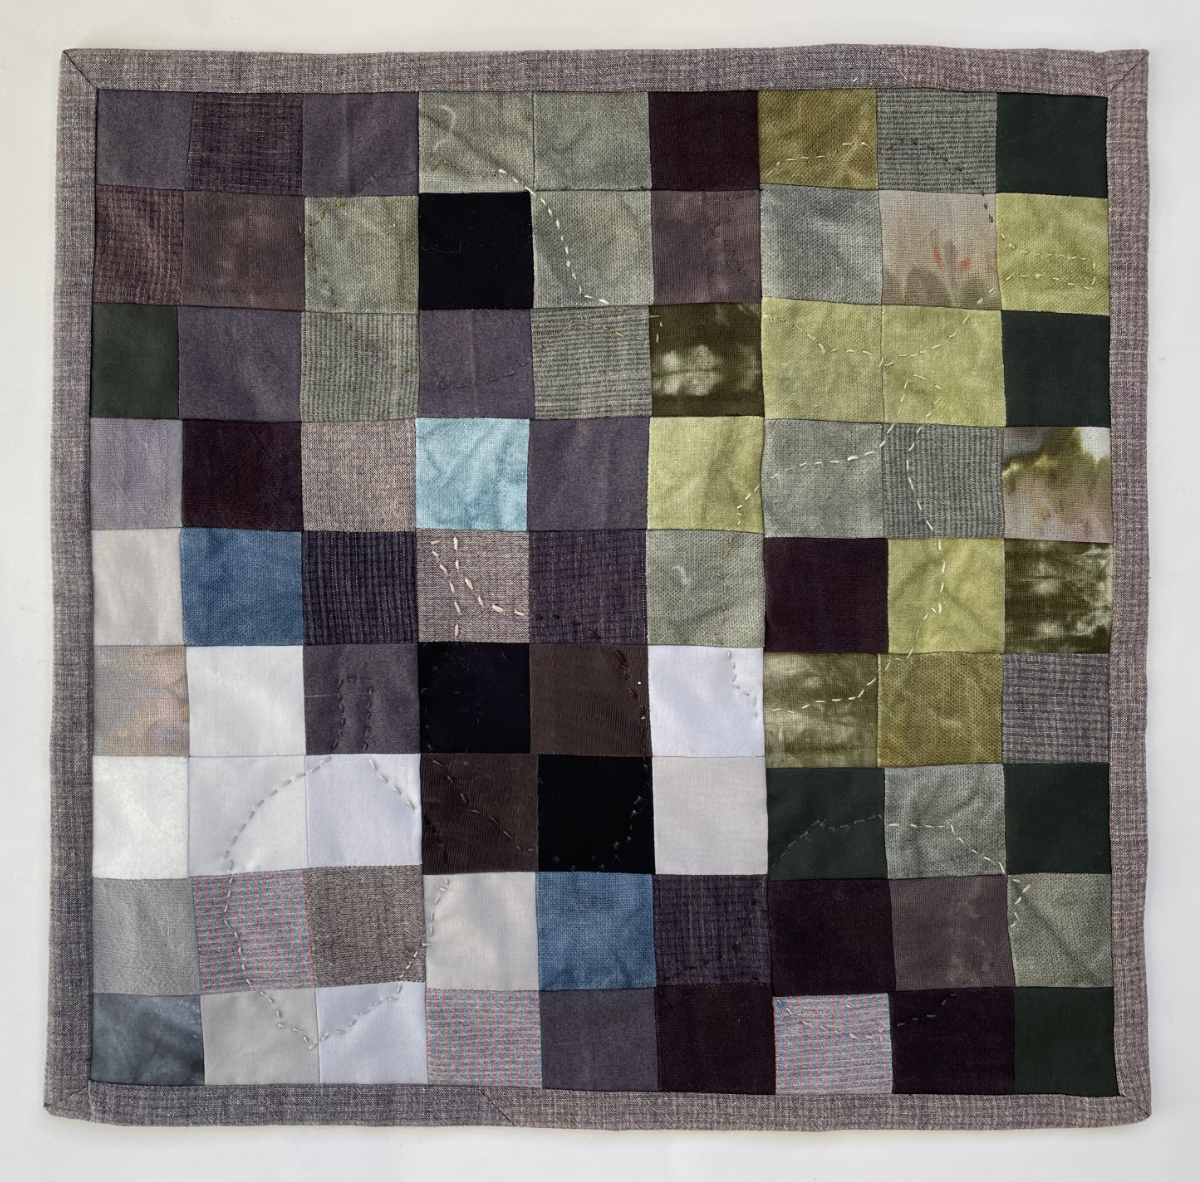 abstract pieced quilt with 9 x 9 squares in oak tree colors and embroidered outlines of oak leaves